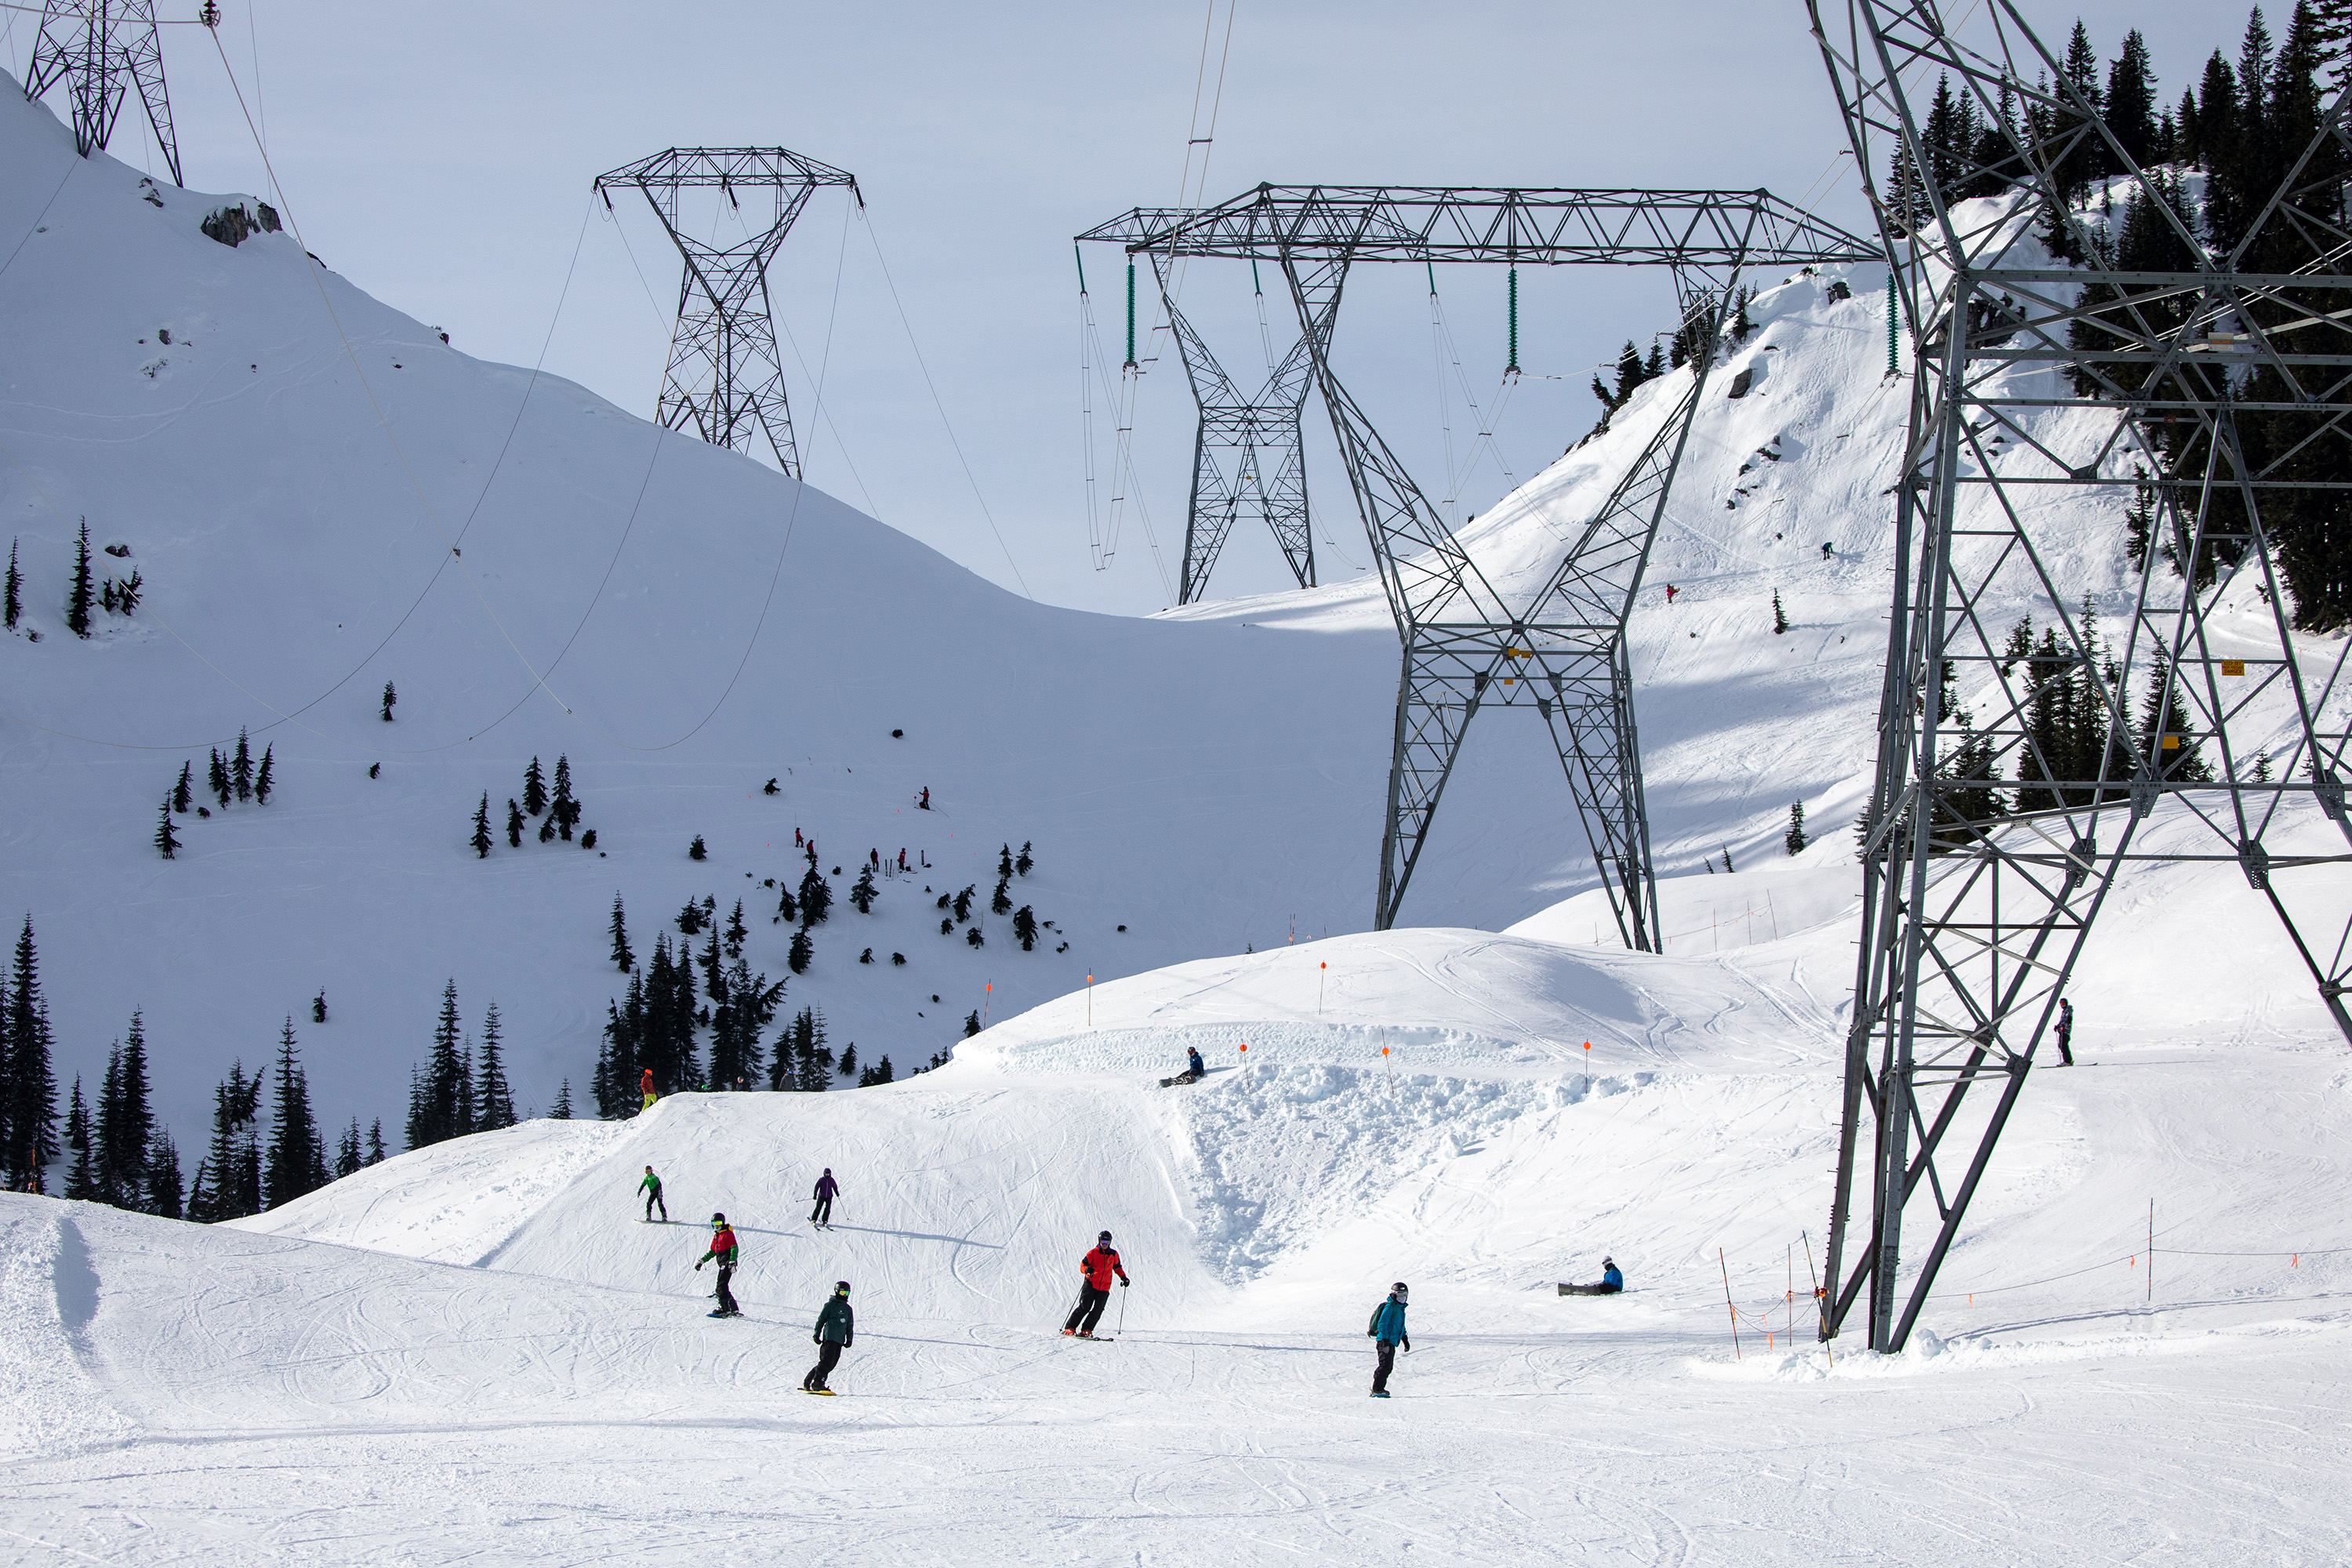 Skiers and snowboarders come down Gemini under the power lines on the back side of the mountain Friday, Jan. 28, 2022, at Stevens Pass, Washington.